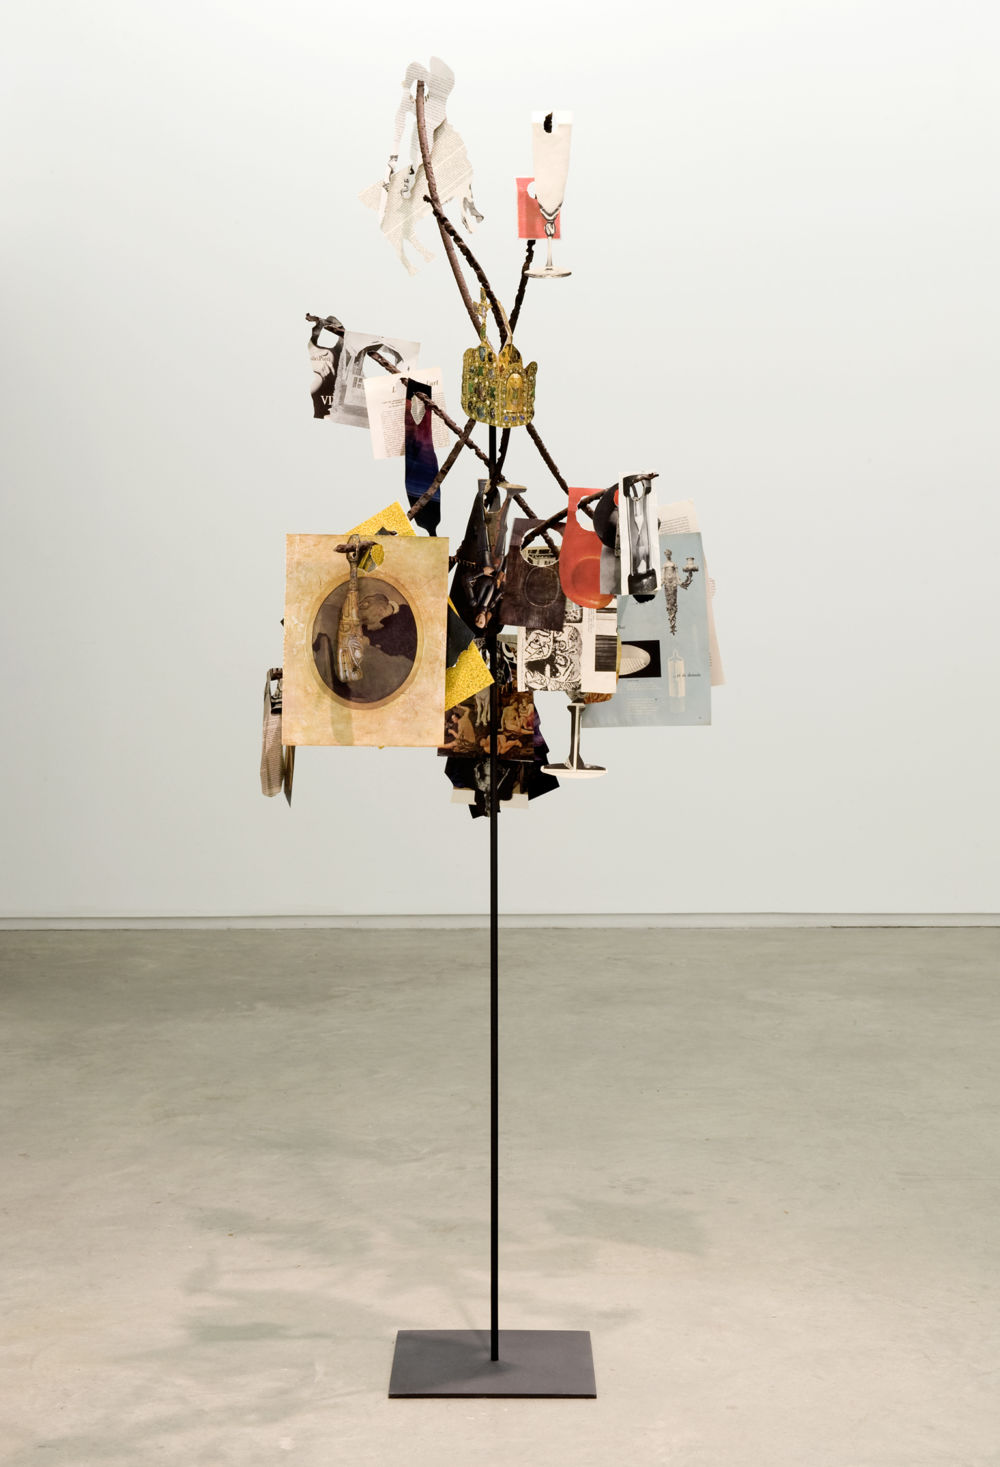 ​Geoffrey Farmer, Metal Will Stand Tall (A Single Image Is Not A Splendor), 2011, found metal, book cut outs, metal box, musical instruments, dimensions variable by 